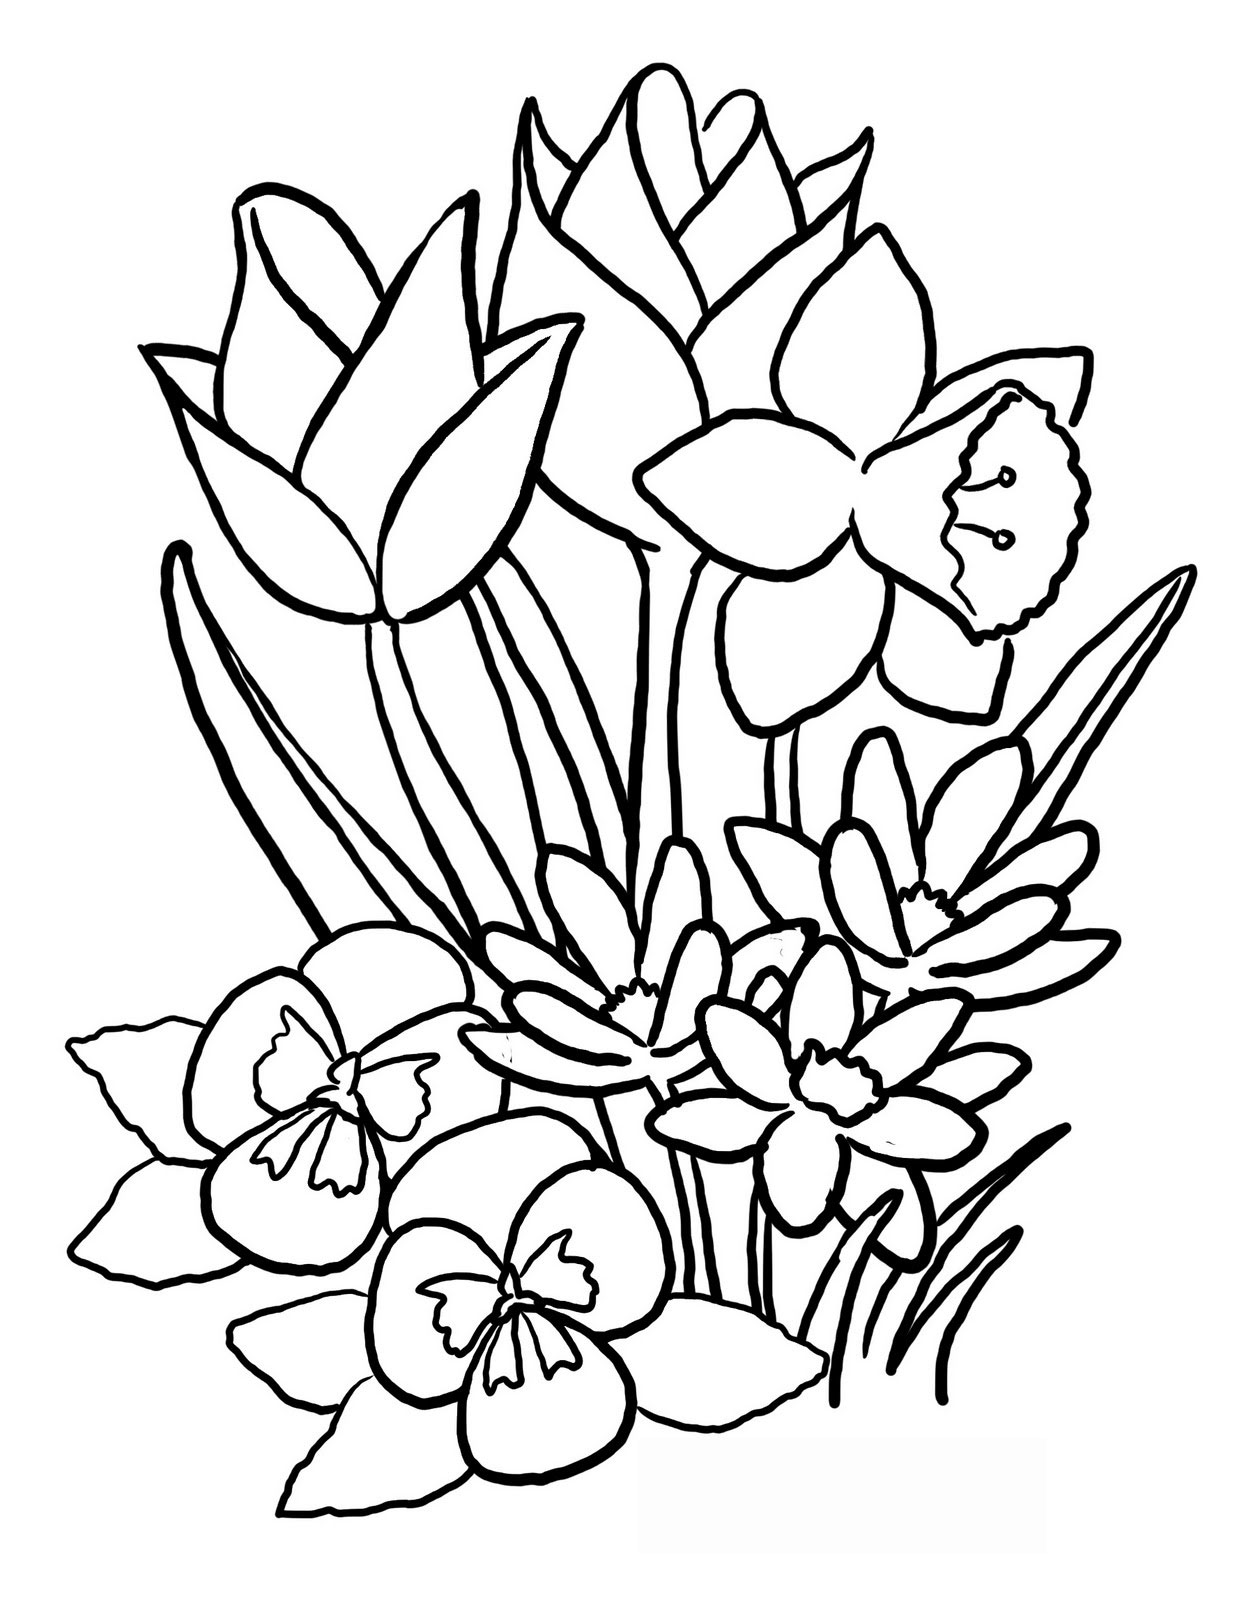 Drawings Of Spring Flowers | Free Download Clip Art | Free Clip ...